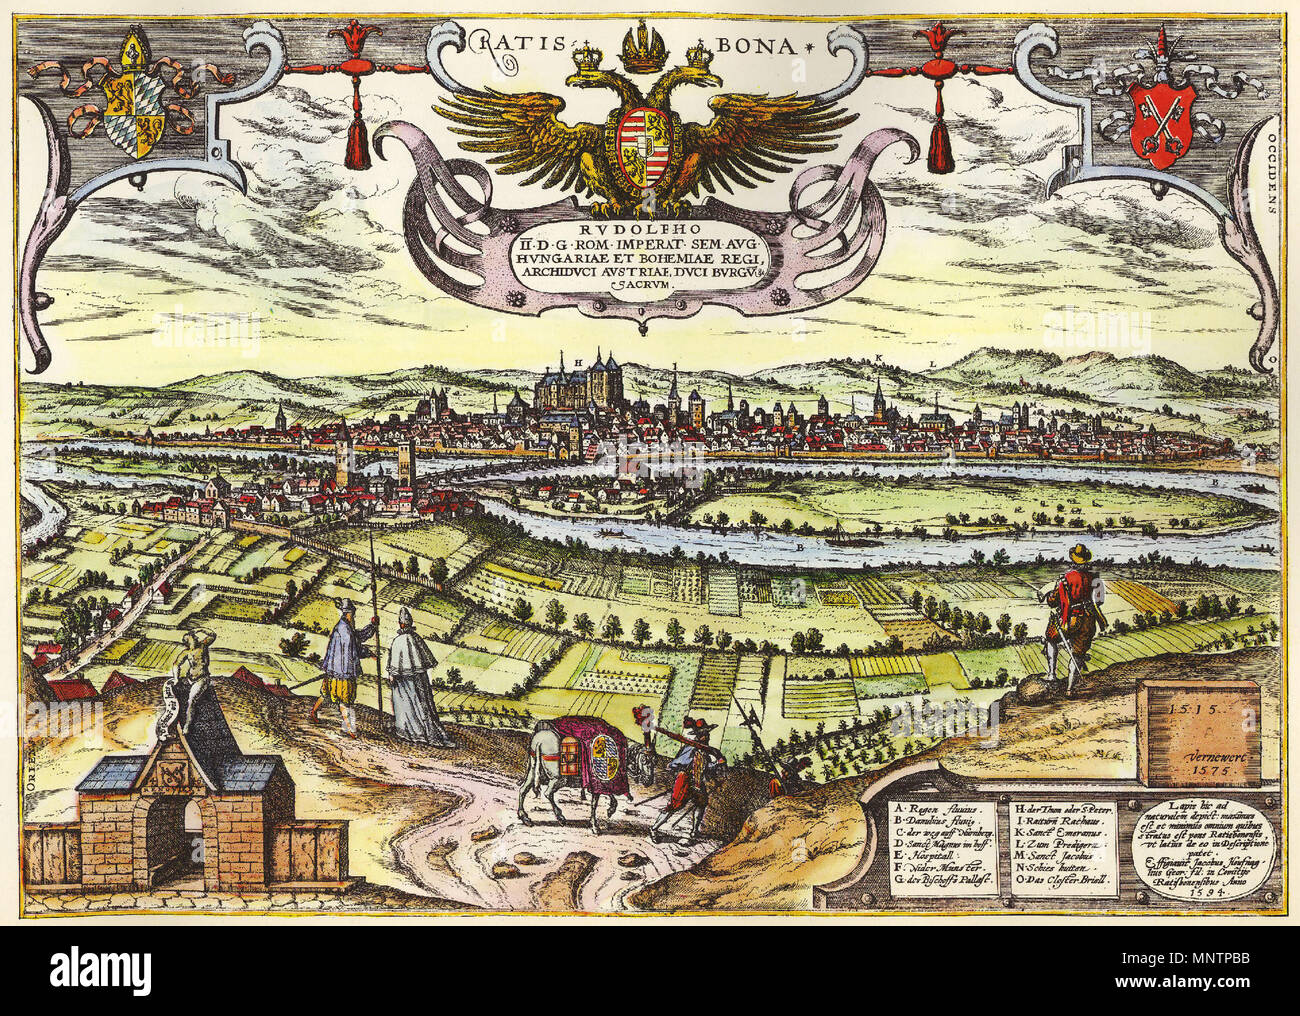 . English: historical sight of the German town of Regensburg by Georg Braun and Franz Hogenberg (between 1572 and 1618) . between 1572 and 1618. Georg Braun and Franz Hogenberg 1045 Regensburg Braun-Hogenberg Stock Photo